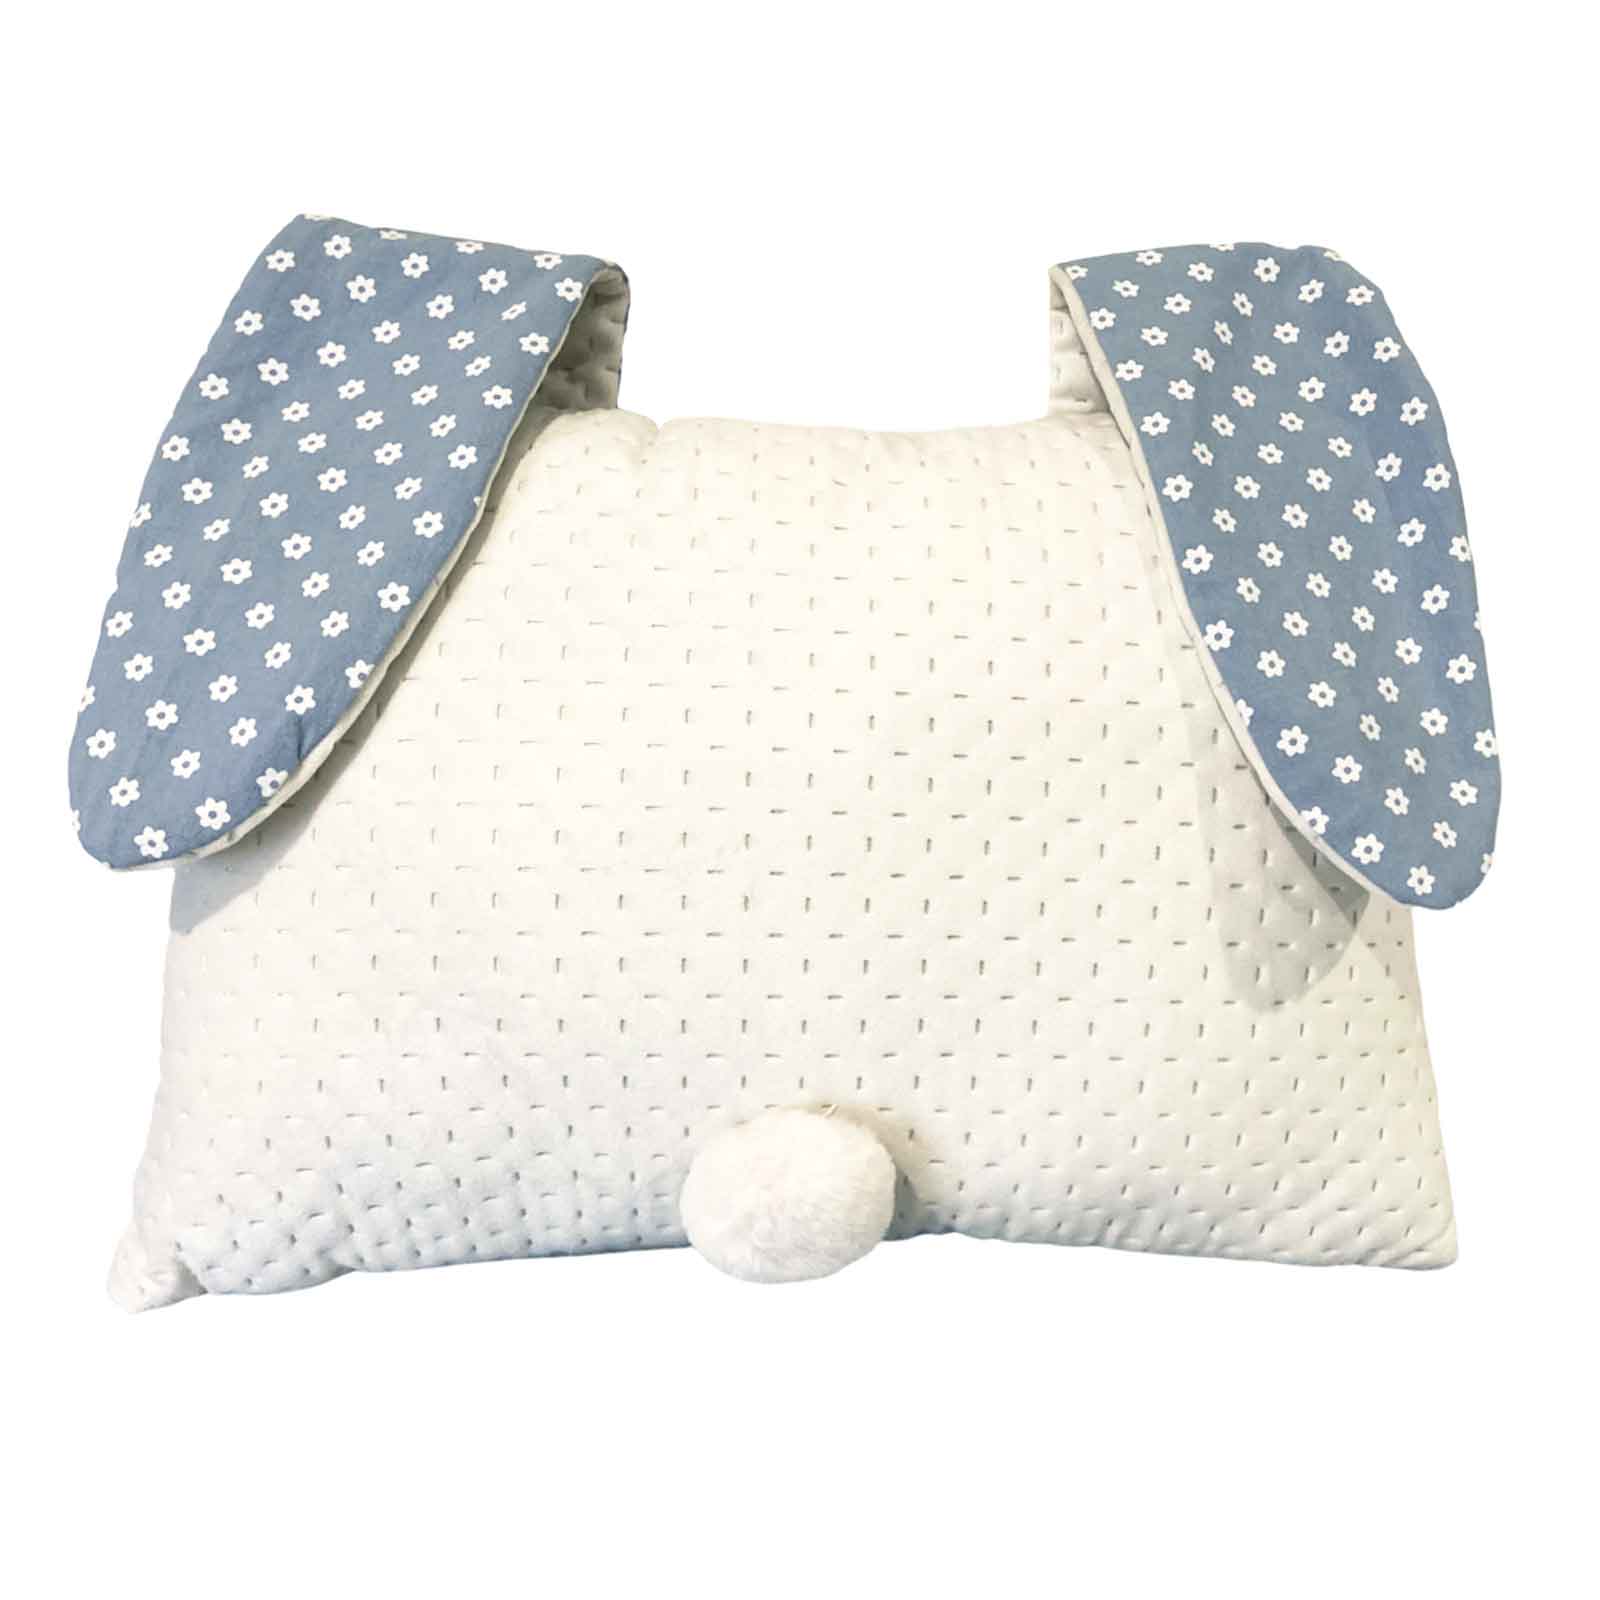 Blue Bunny Rabbit Zip Plush Cushion - view from back with soft fluffy tail